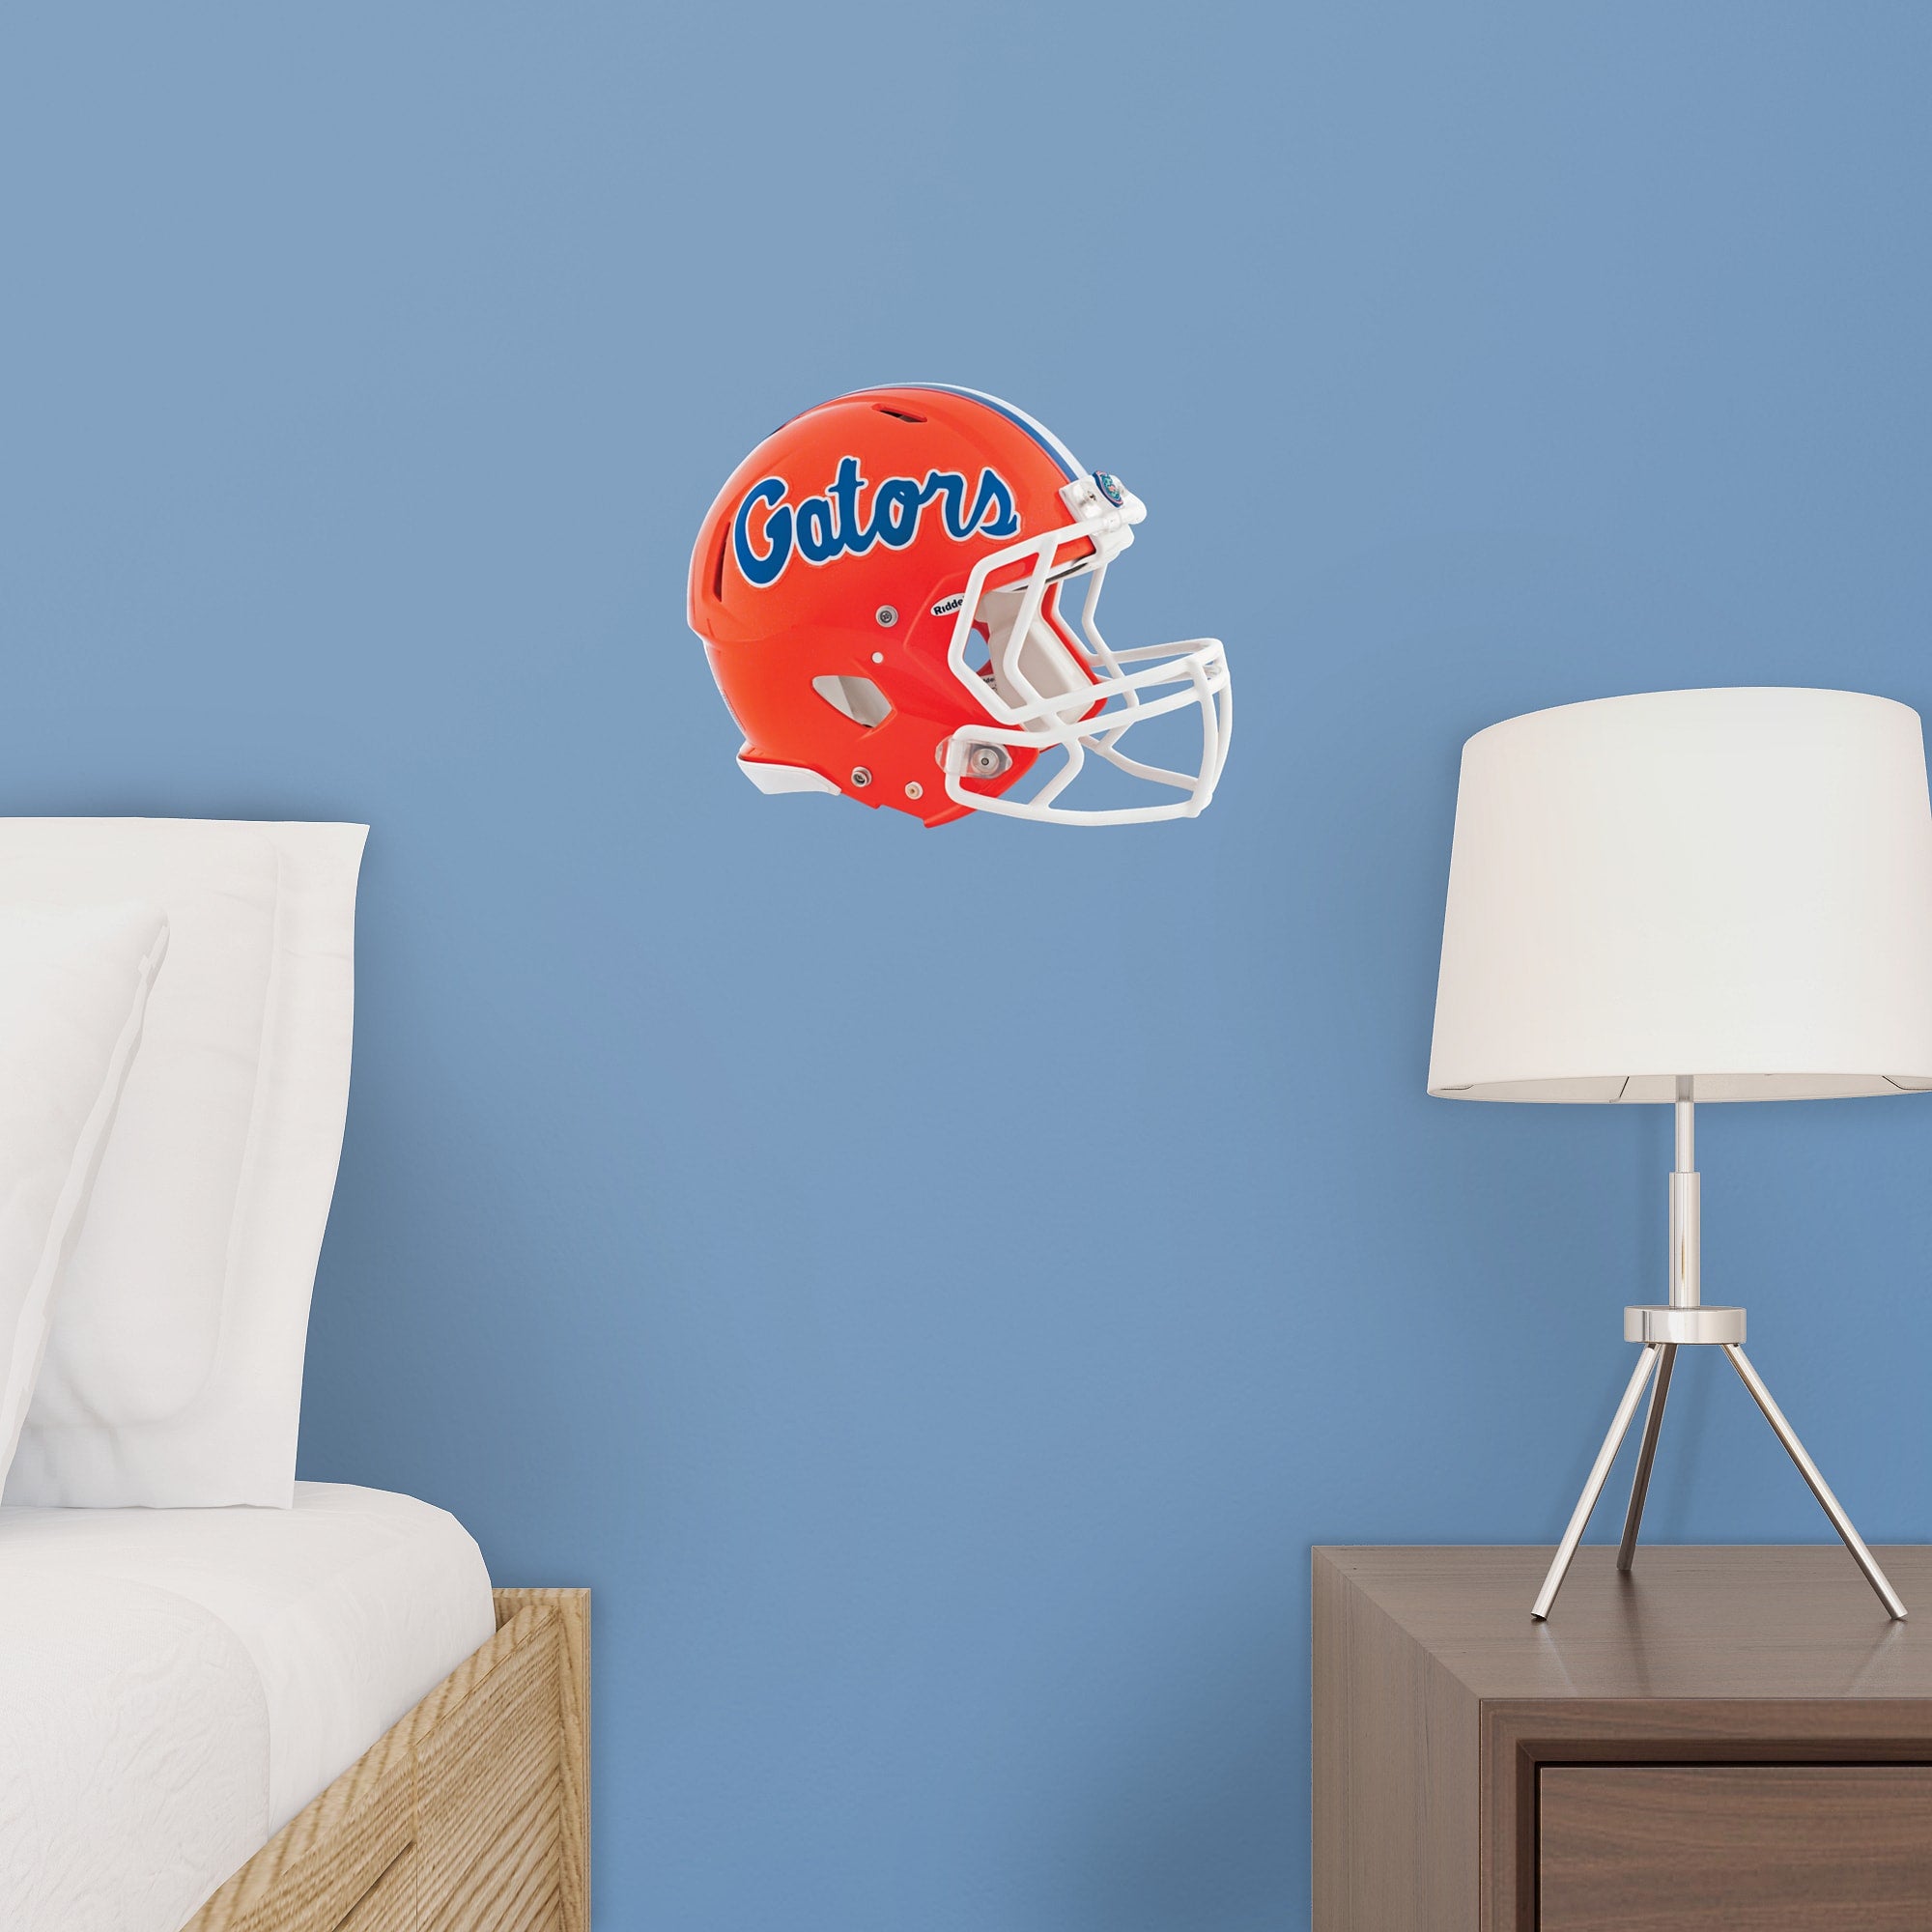 Florida Gators: Helmet - Officially Licensed Removable Wall Decal 12.0"W x 10.0"H by Fathead | Vinyl